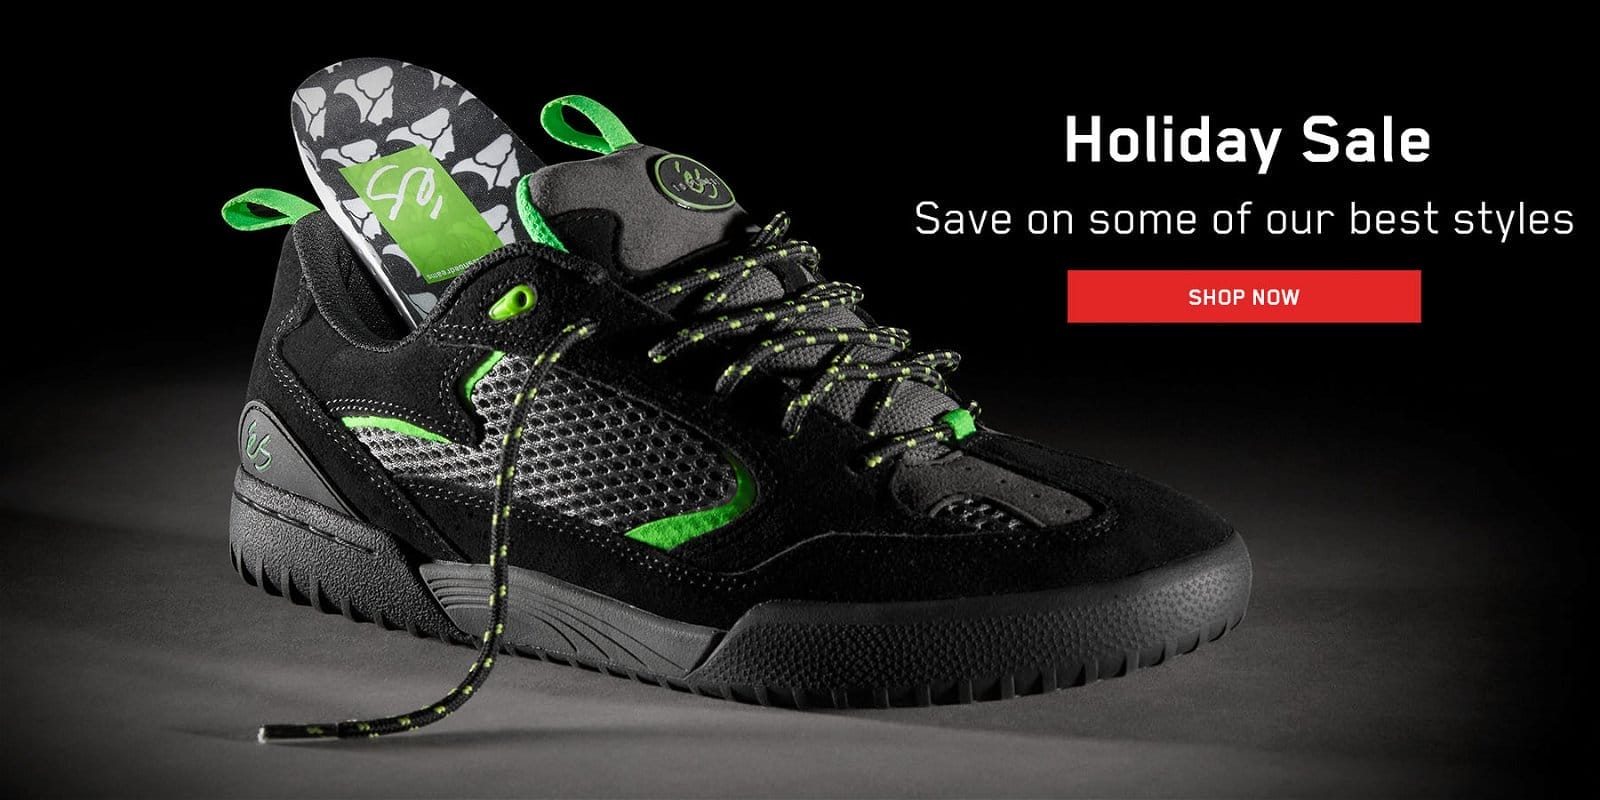 Holiday Sale - Select Shoes \\$29.99